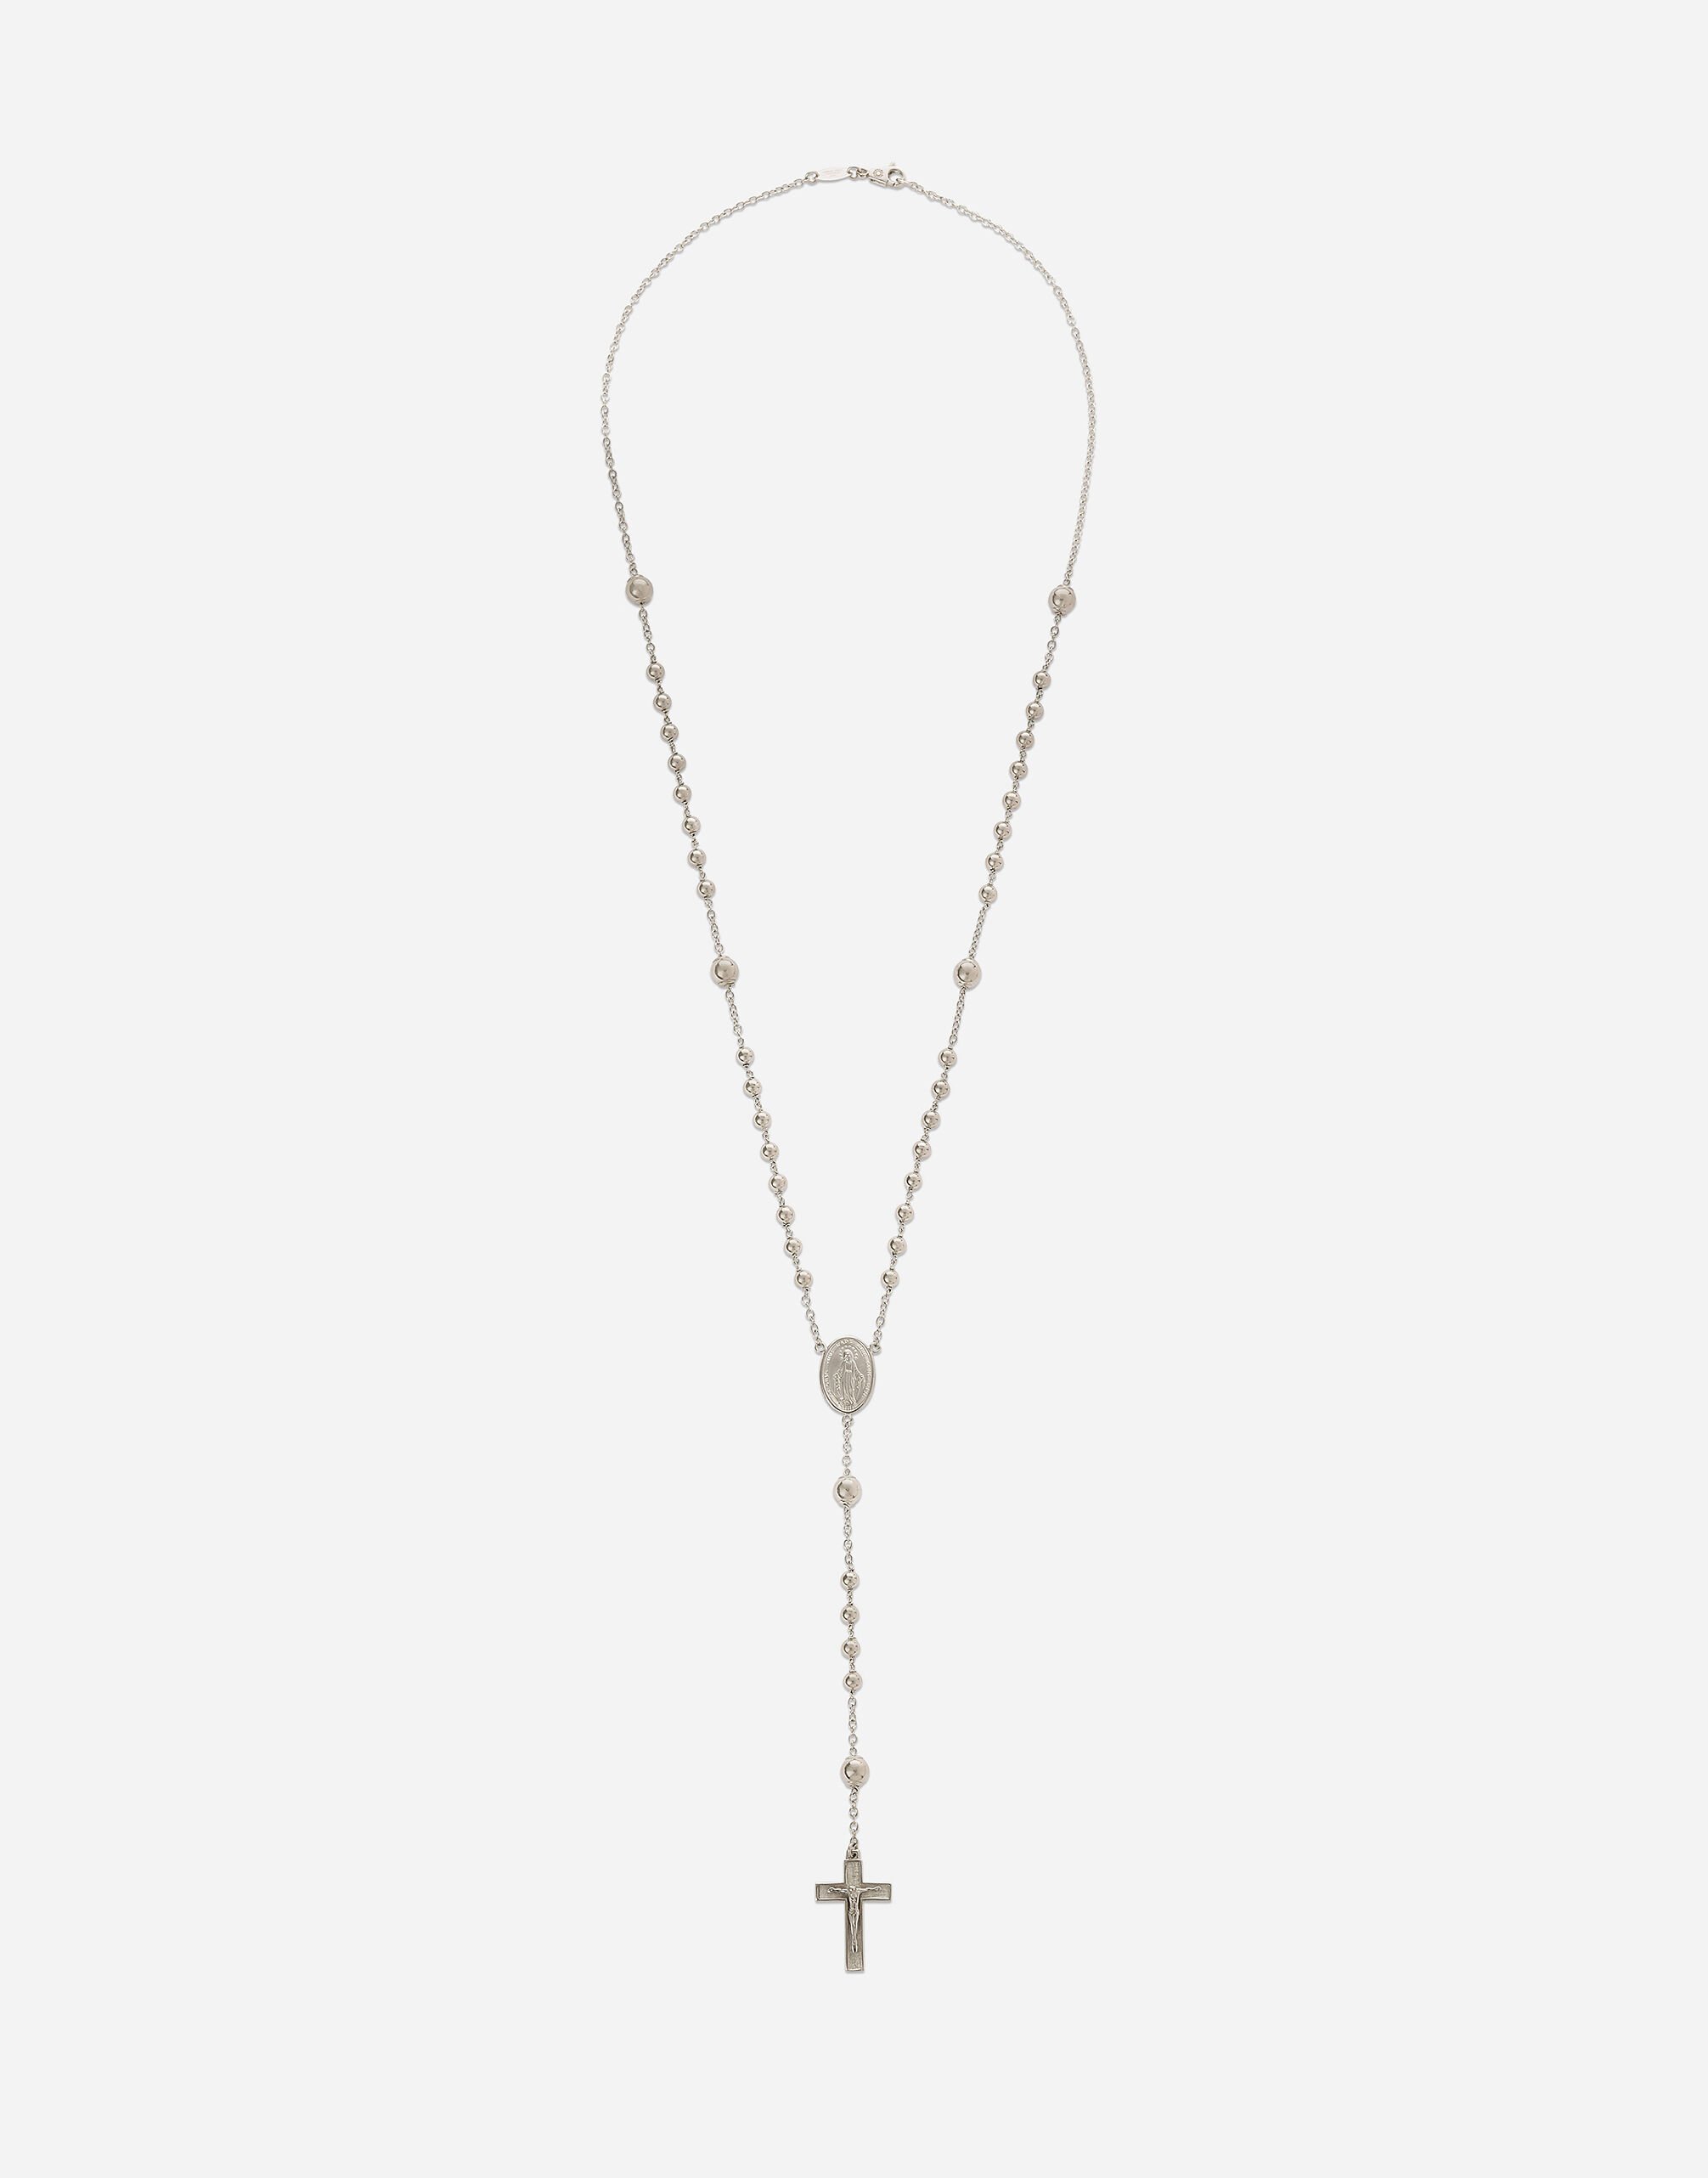 Handmade Rosary Necklace with Gold Cross Pendant